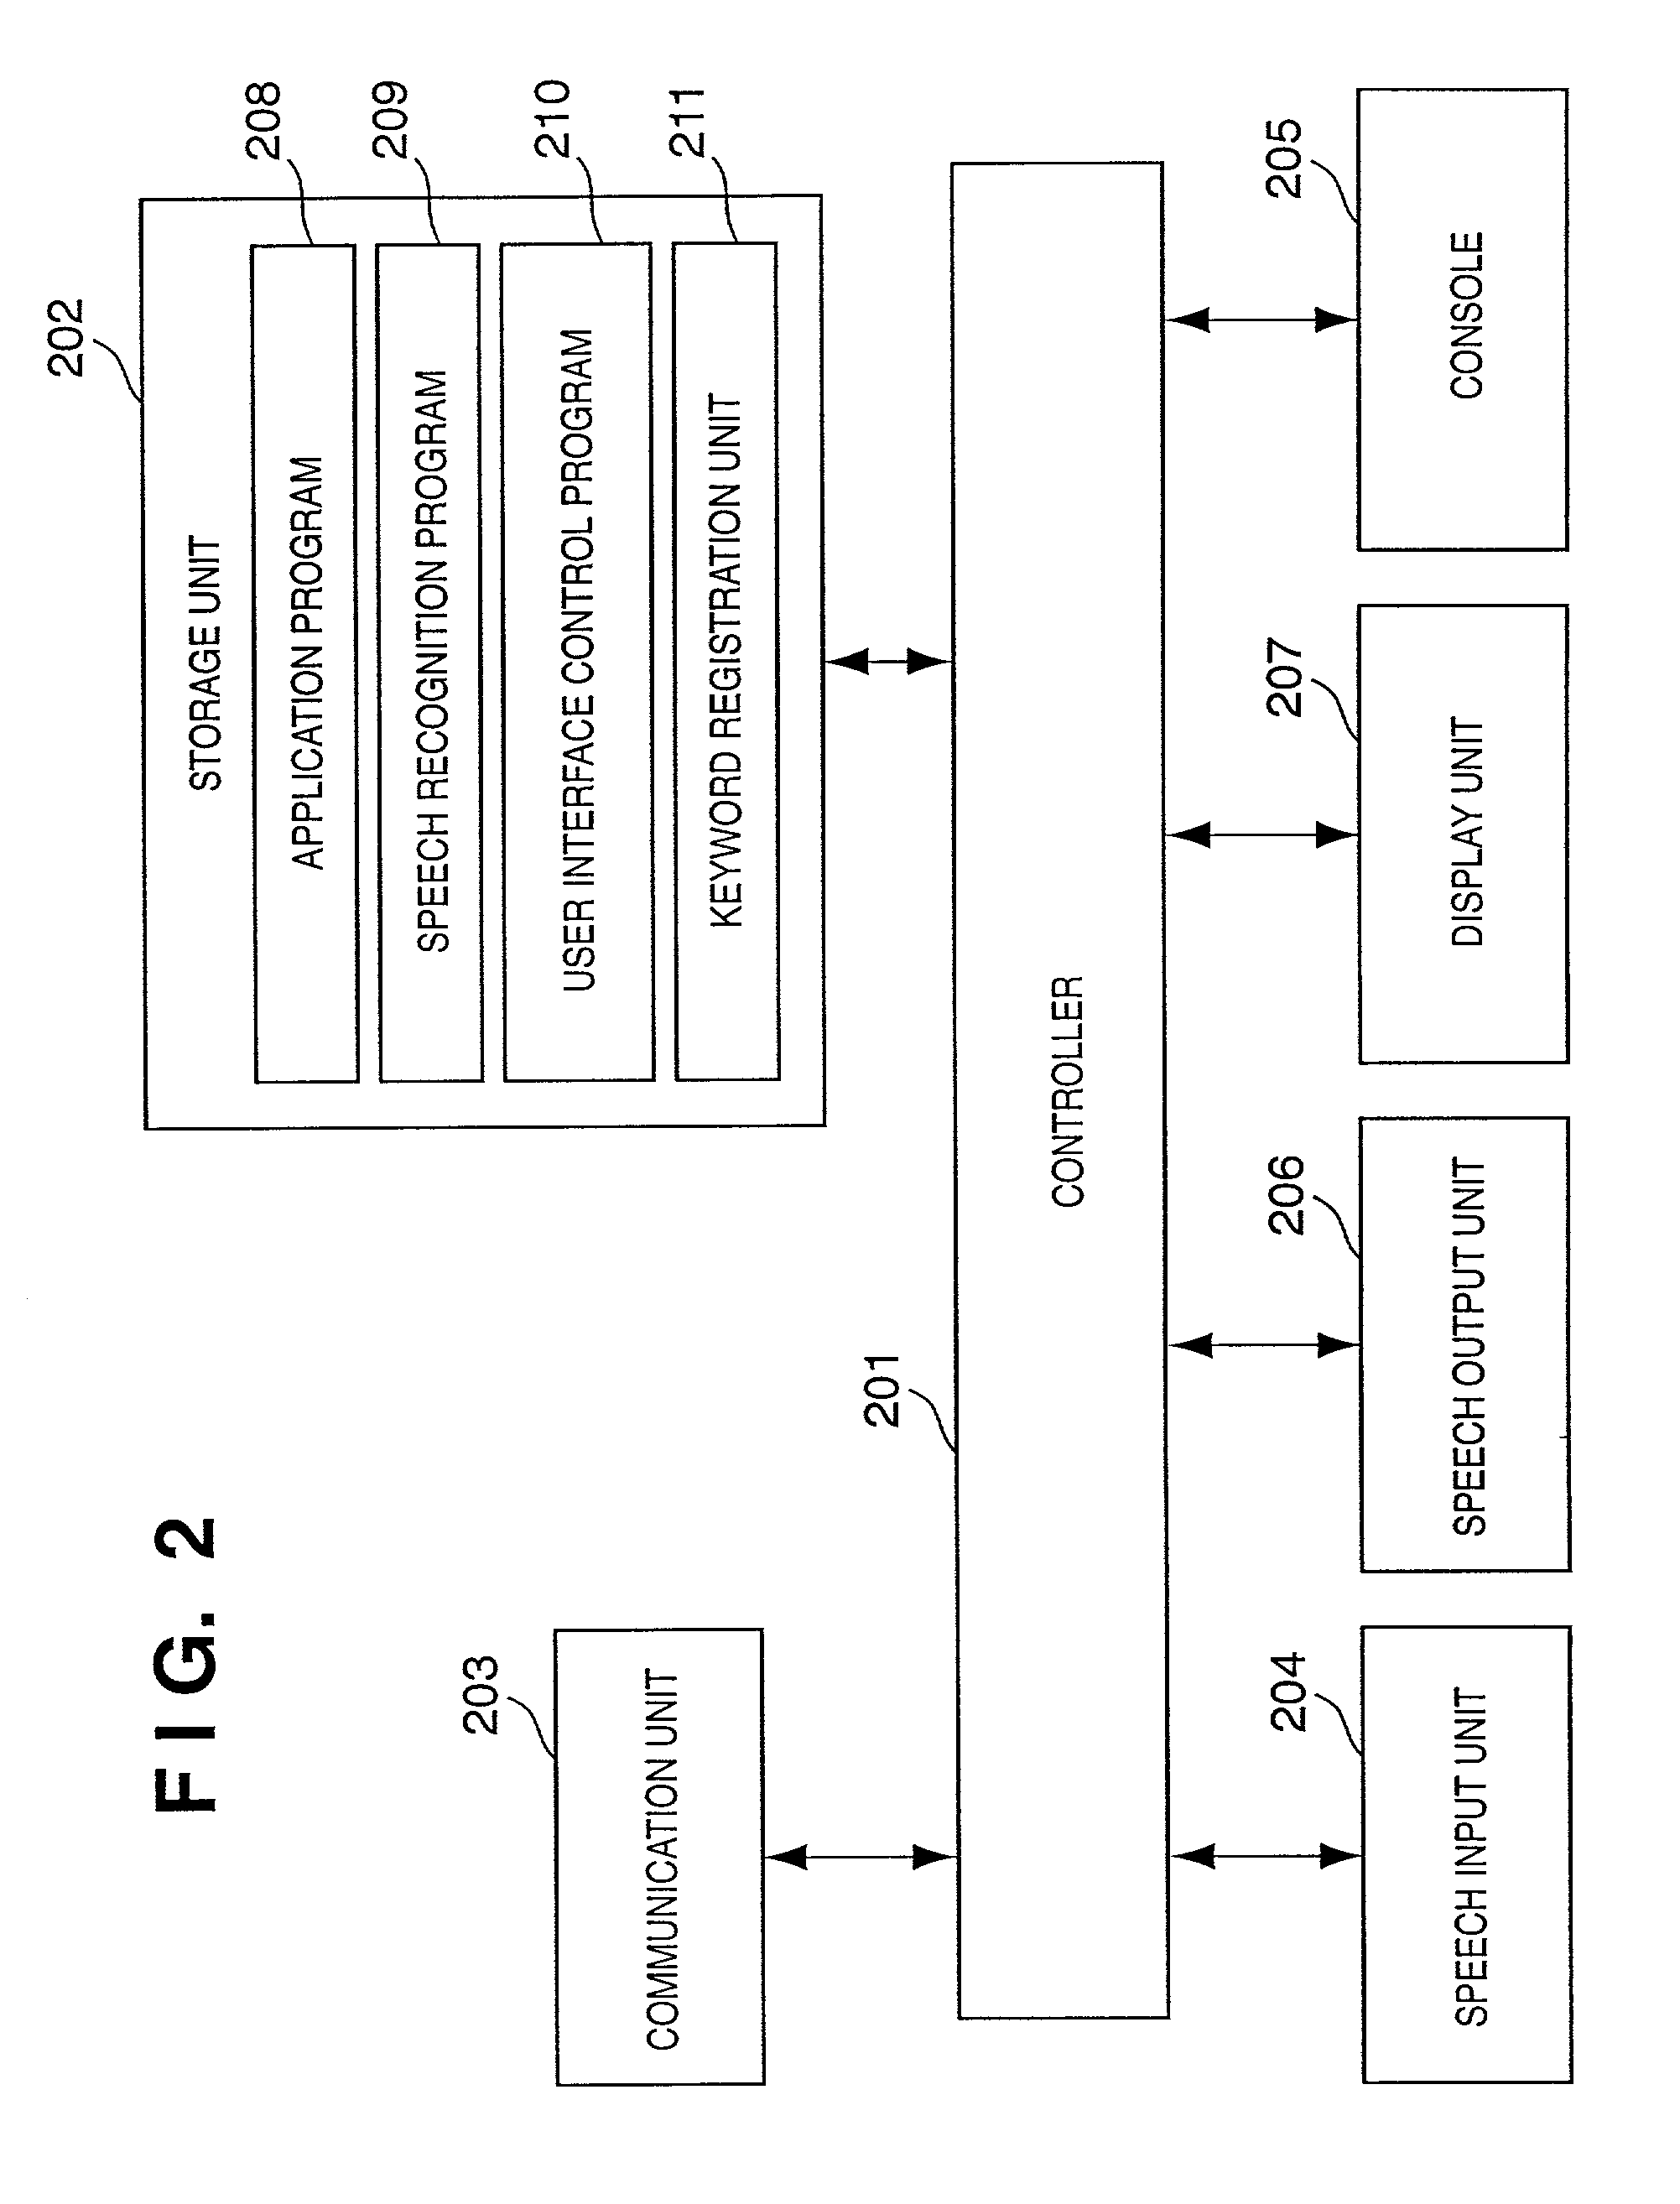 Speech recognition system, speech recognition apparatus, and speech recognition method